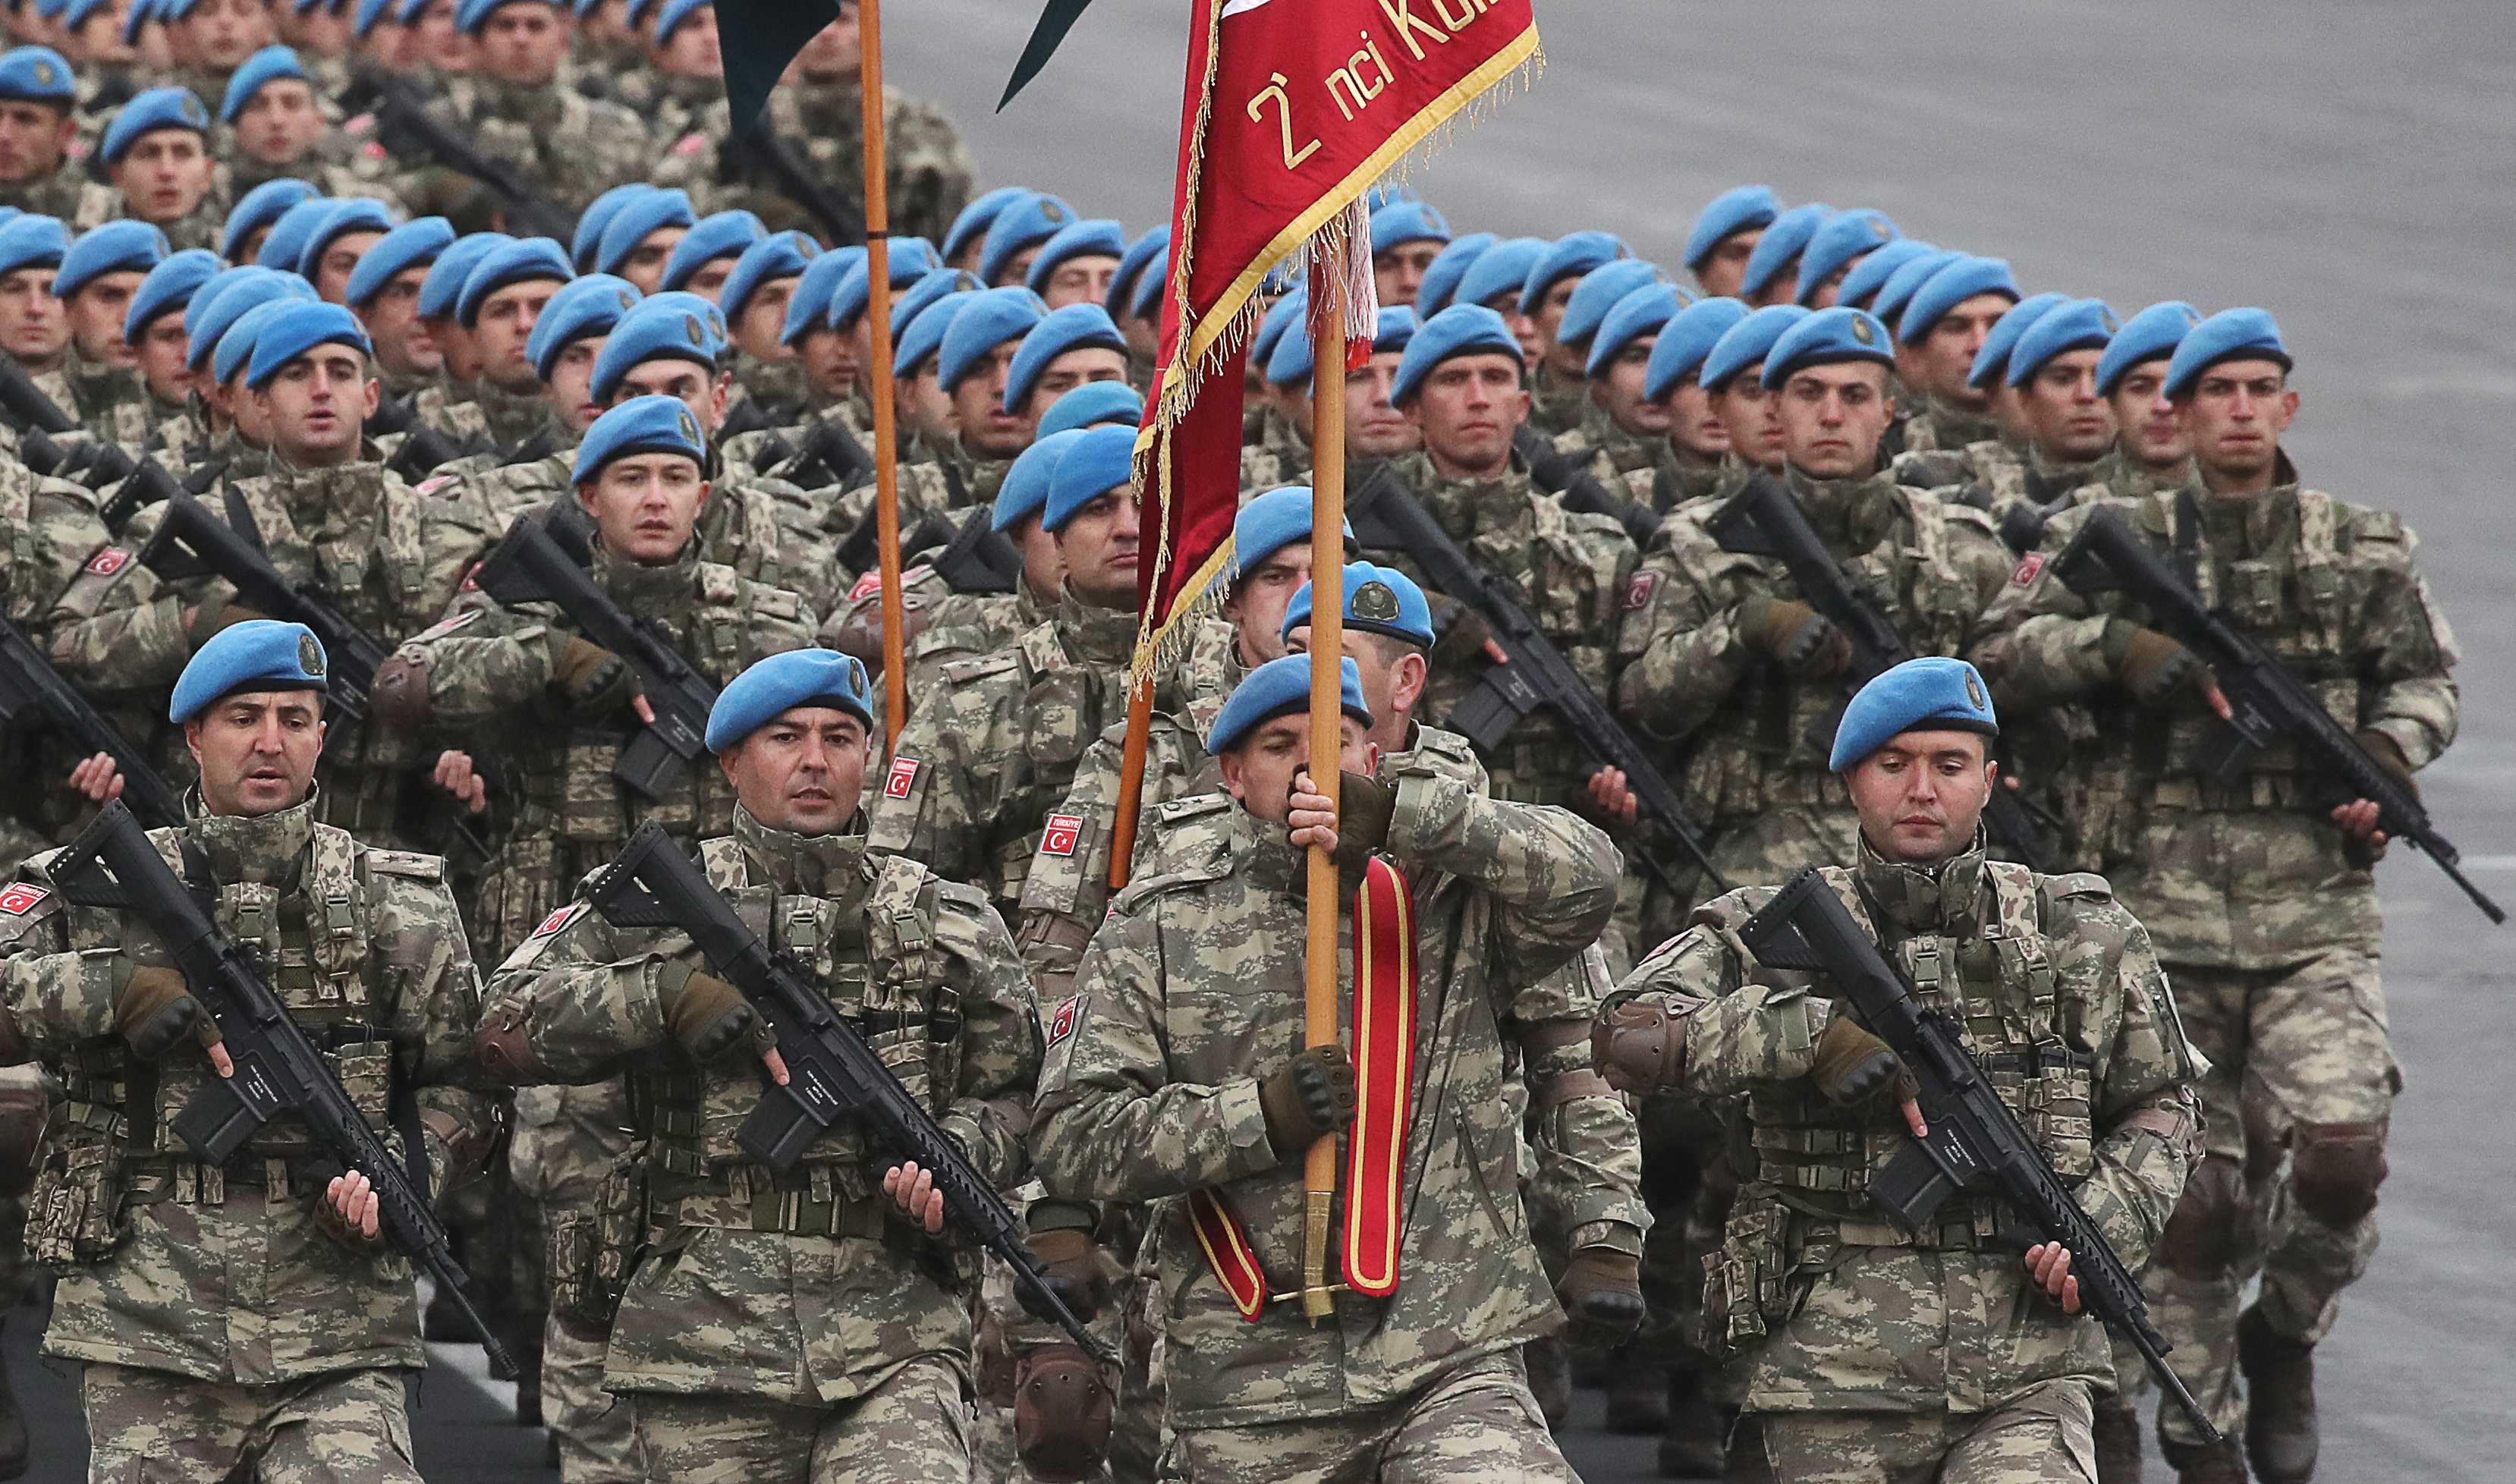 Turkish soldiers march in formation during a military parade marking the end of the Nagorno Karabakh military conflict. (Valery Sharifulin—TASS/Getty Images)